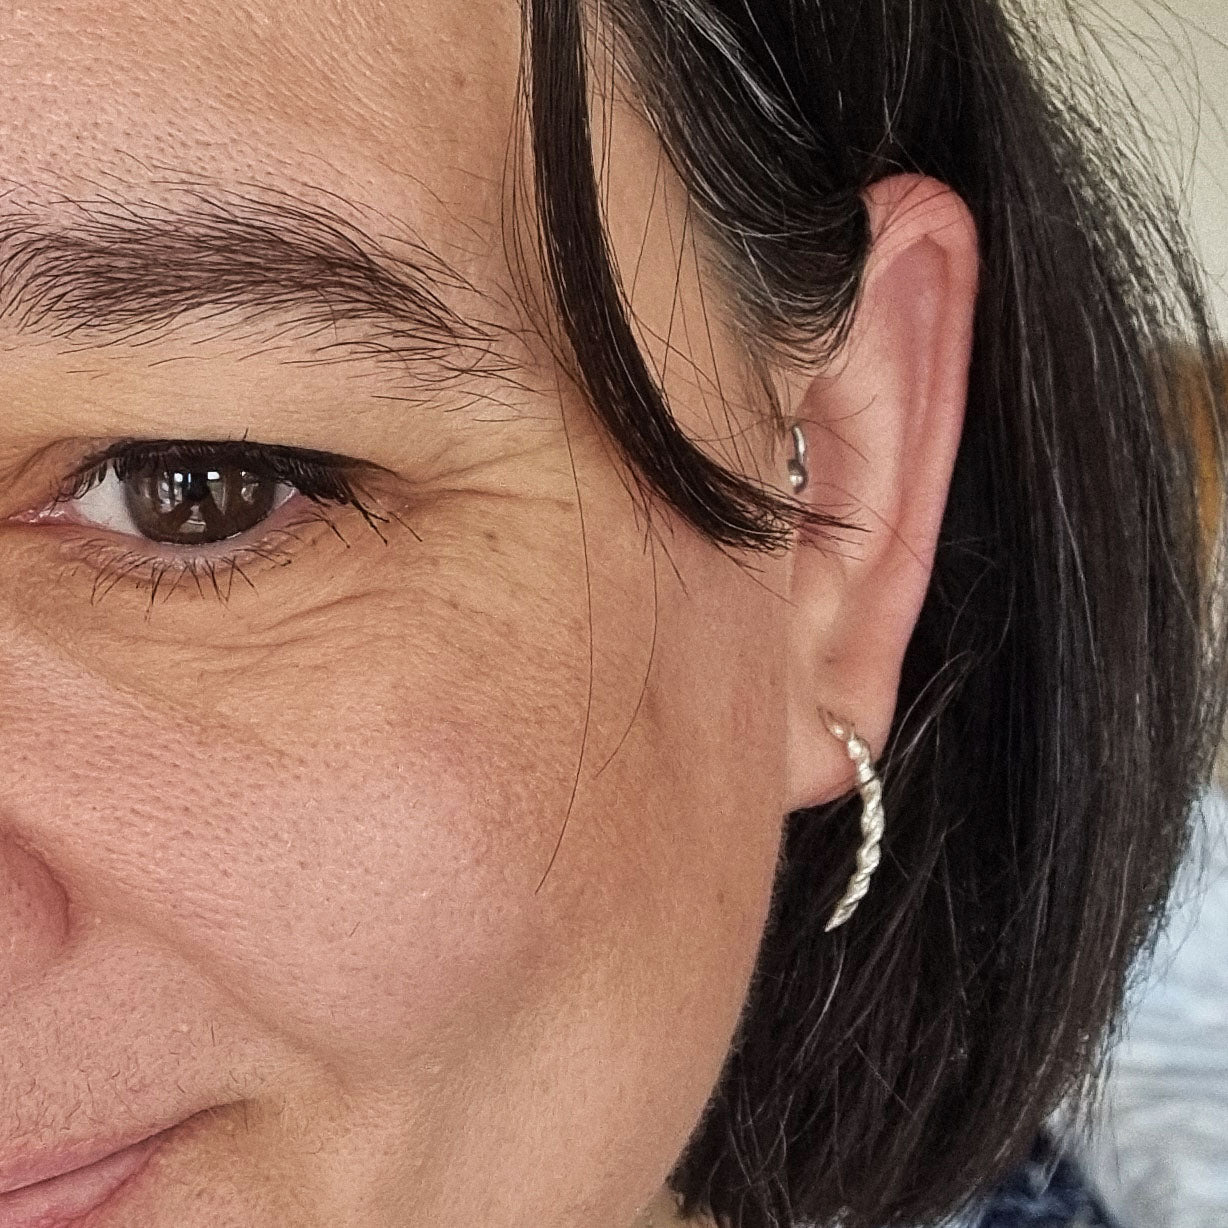 Silver twist curved drop earrings with post fitting. Shown being worn on ear lobe.